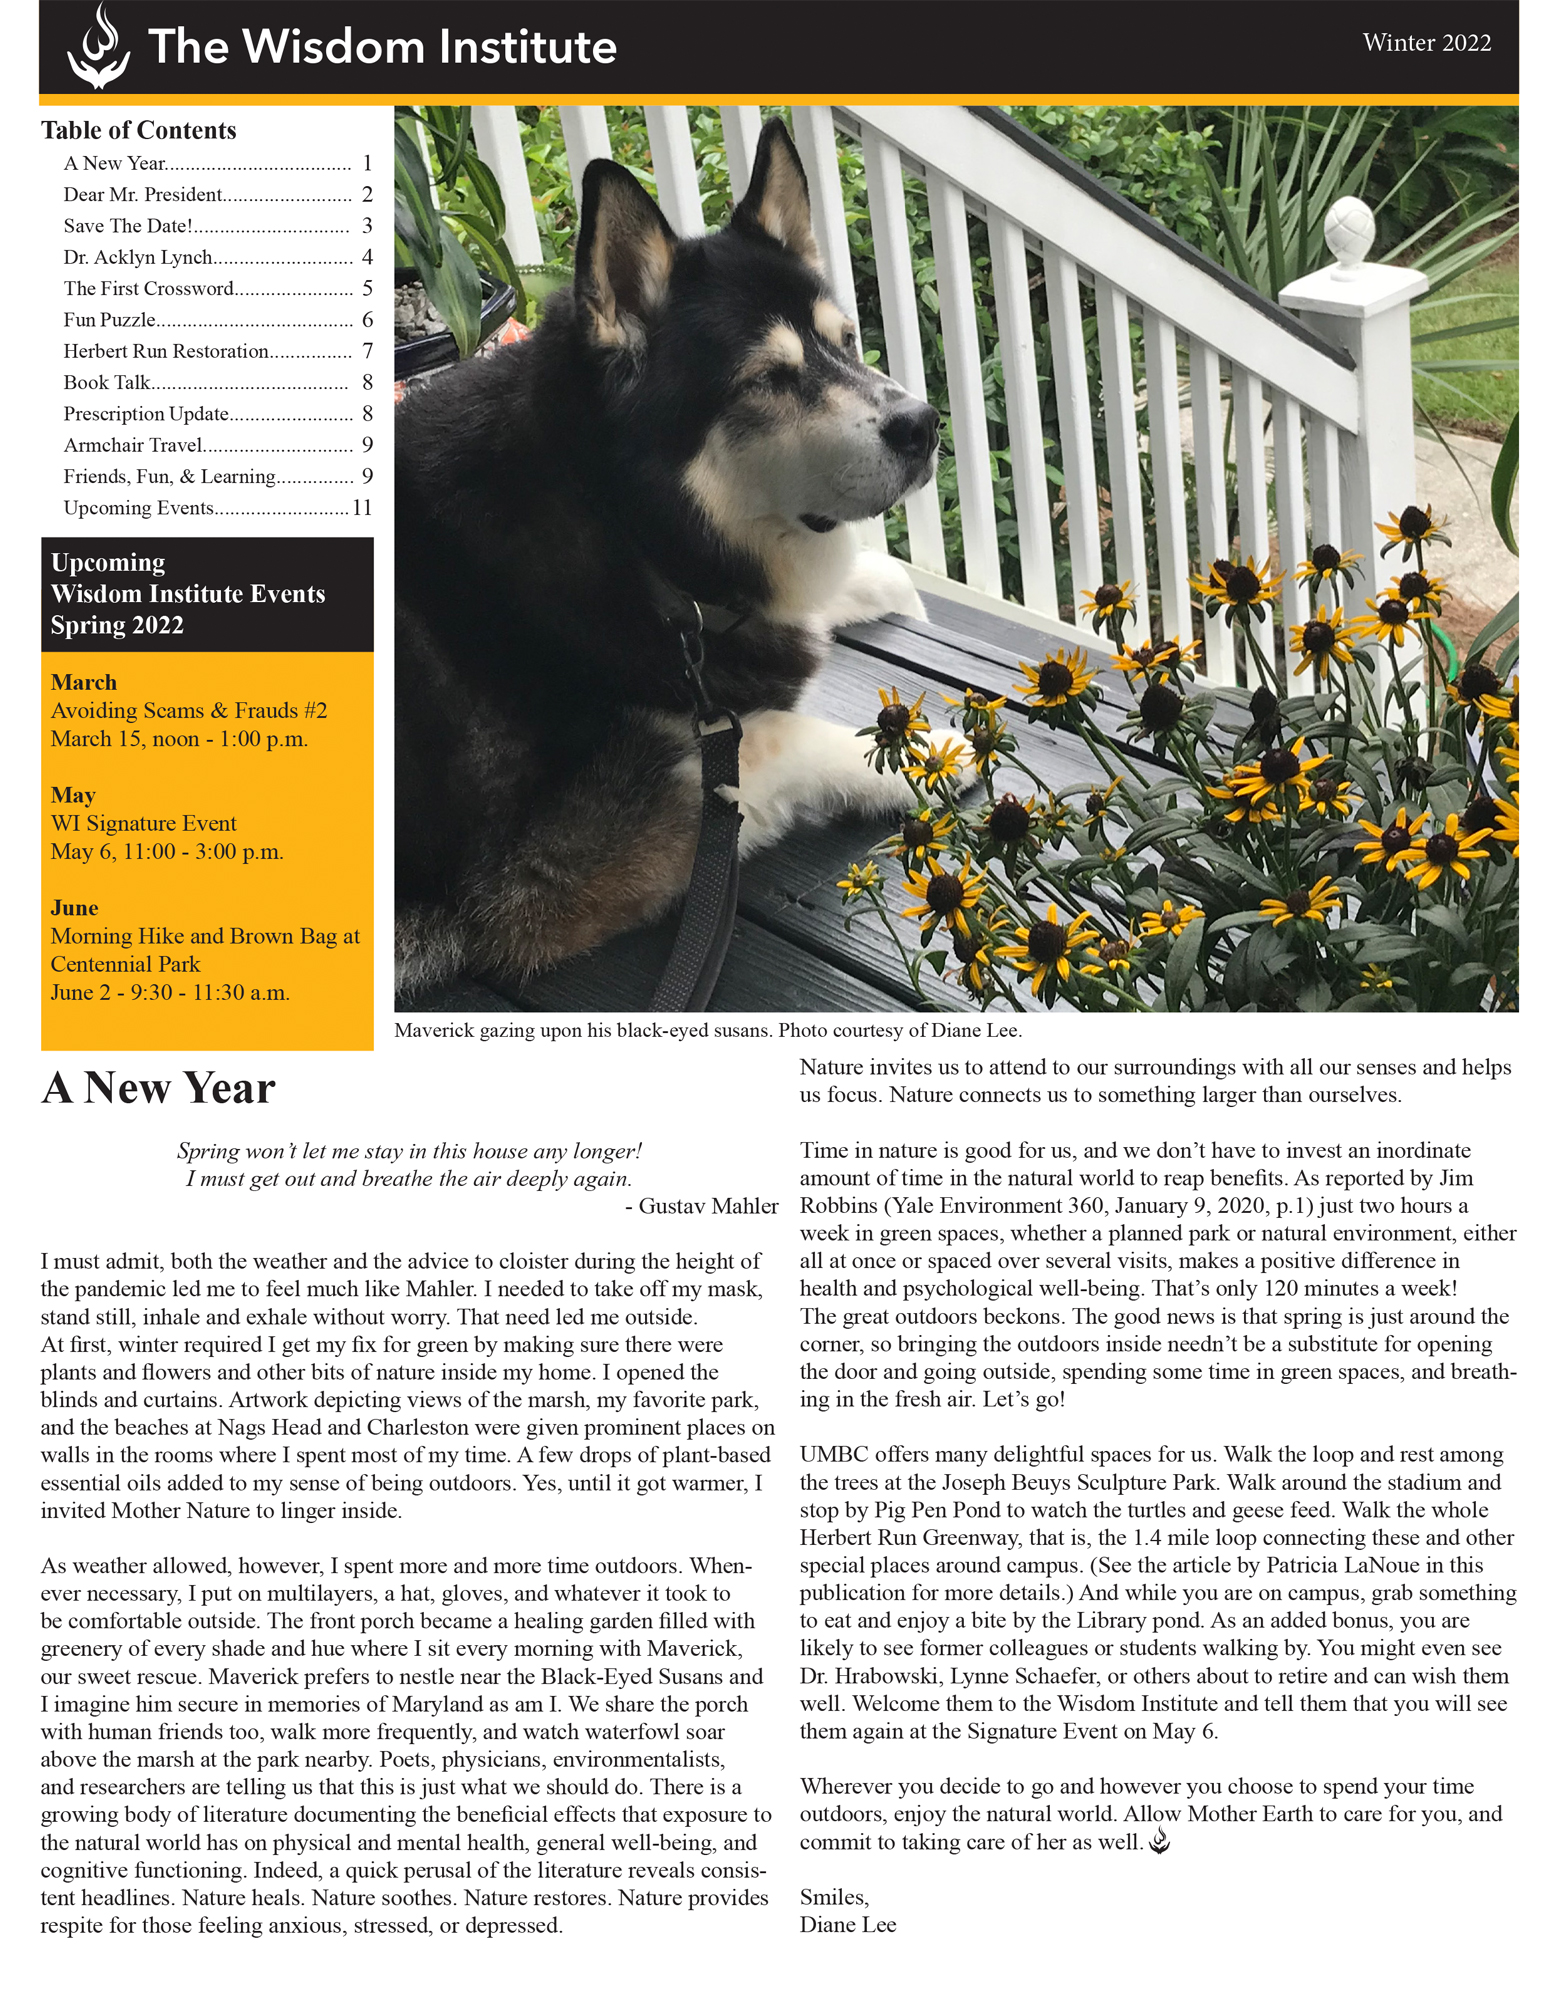 Cover 2022 Issue newsletter #6